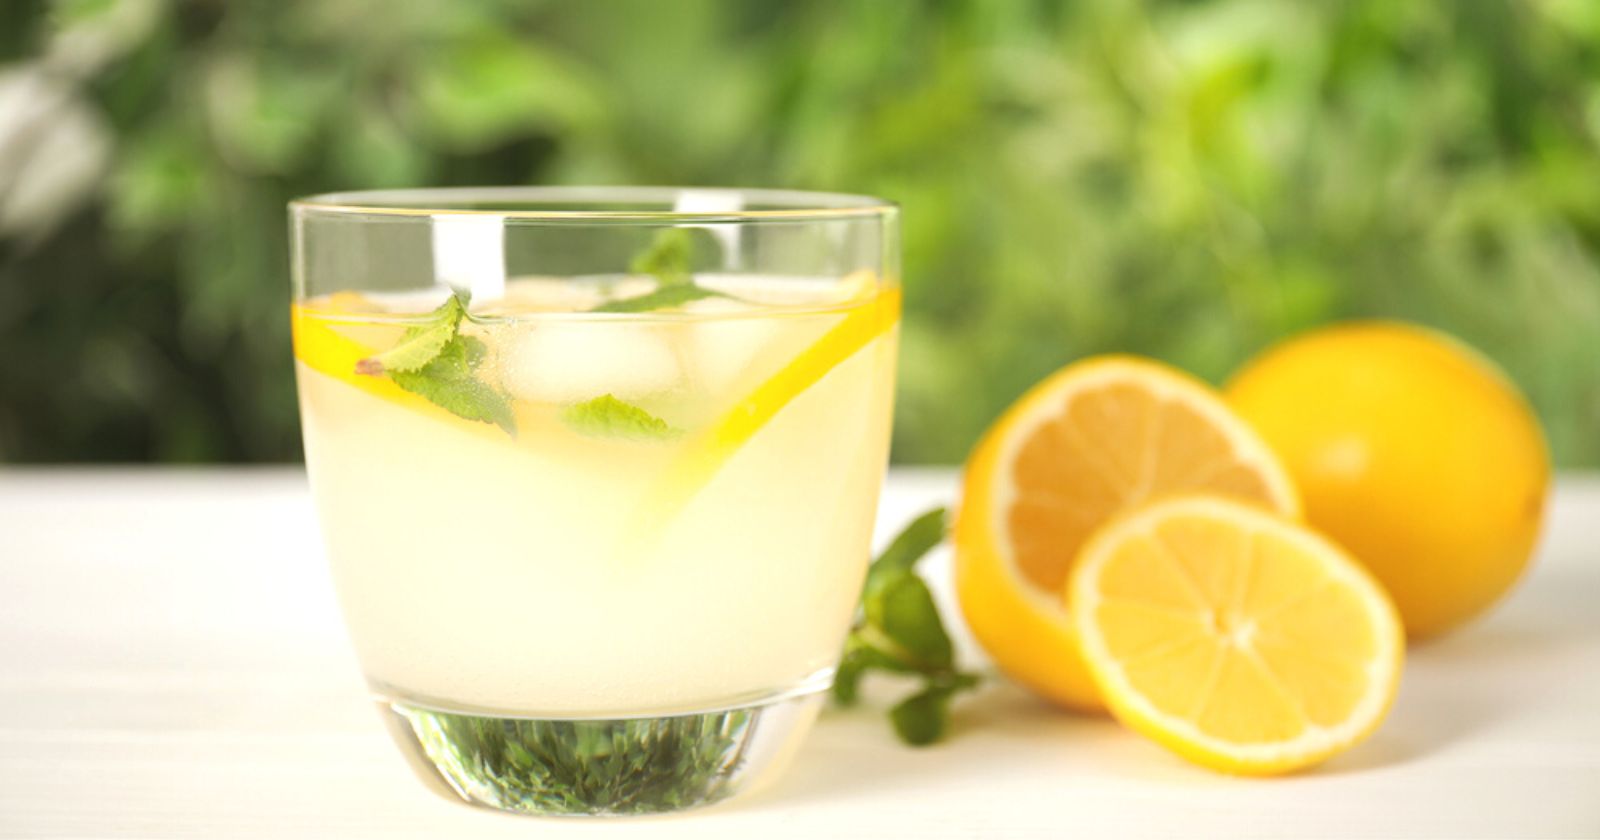 Fancy a homemade lemonade with little sugar?  Here's our summer recipe.